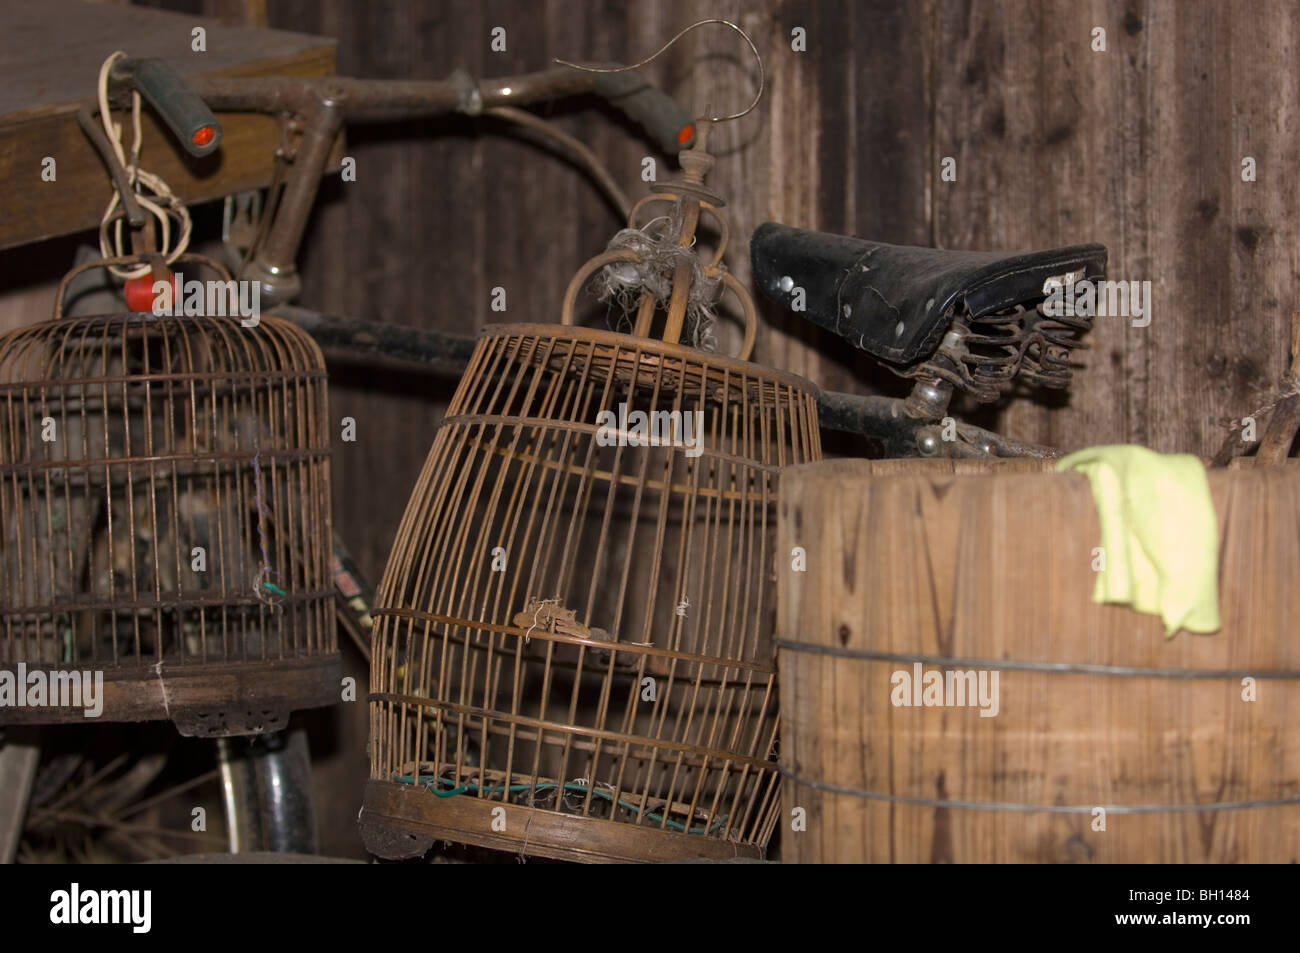 Dusty bicycle and birdcages stowed away in a shed .Jiangxi province, China. Stock Photo